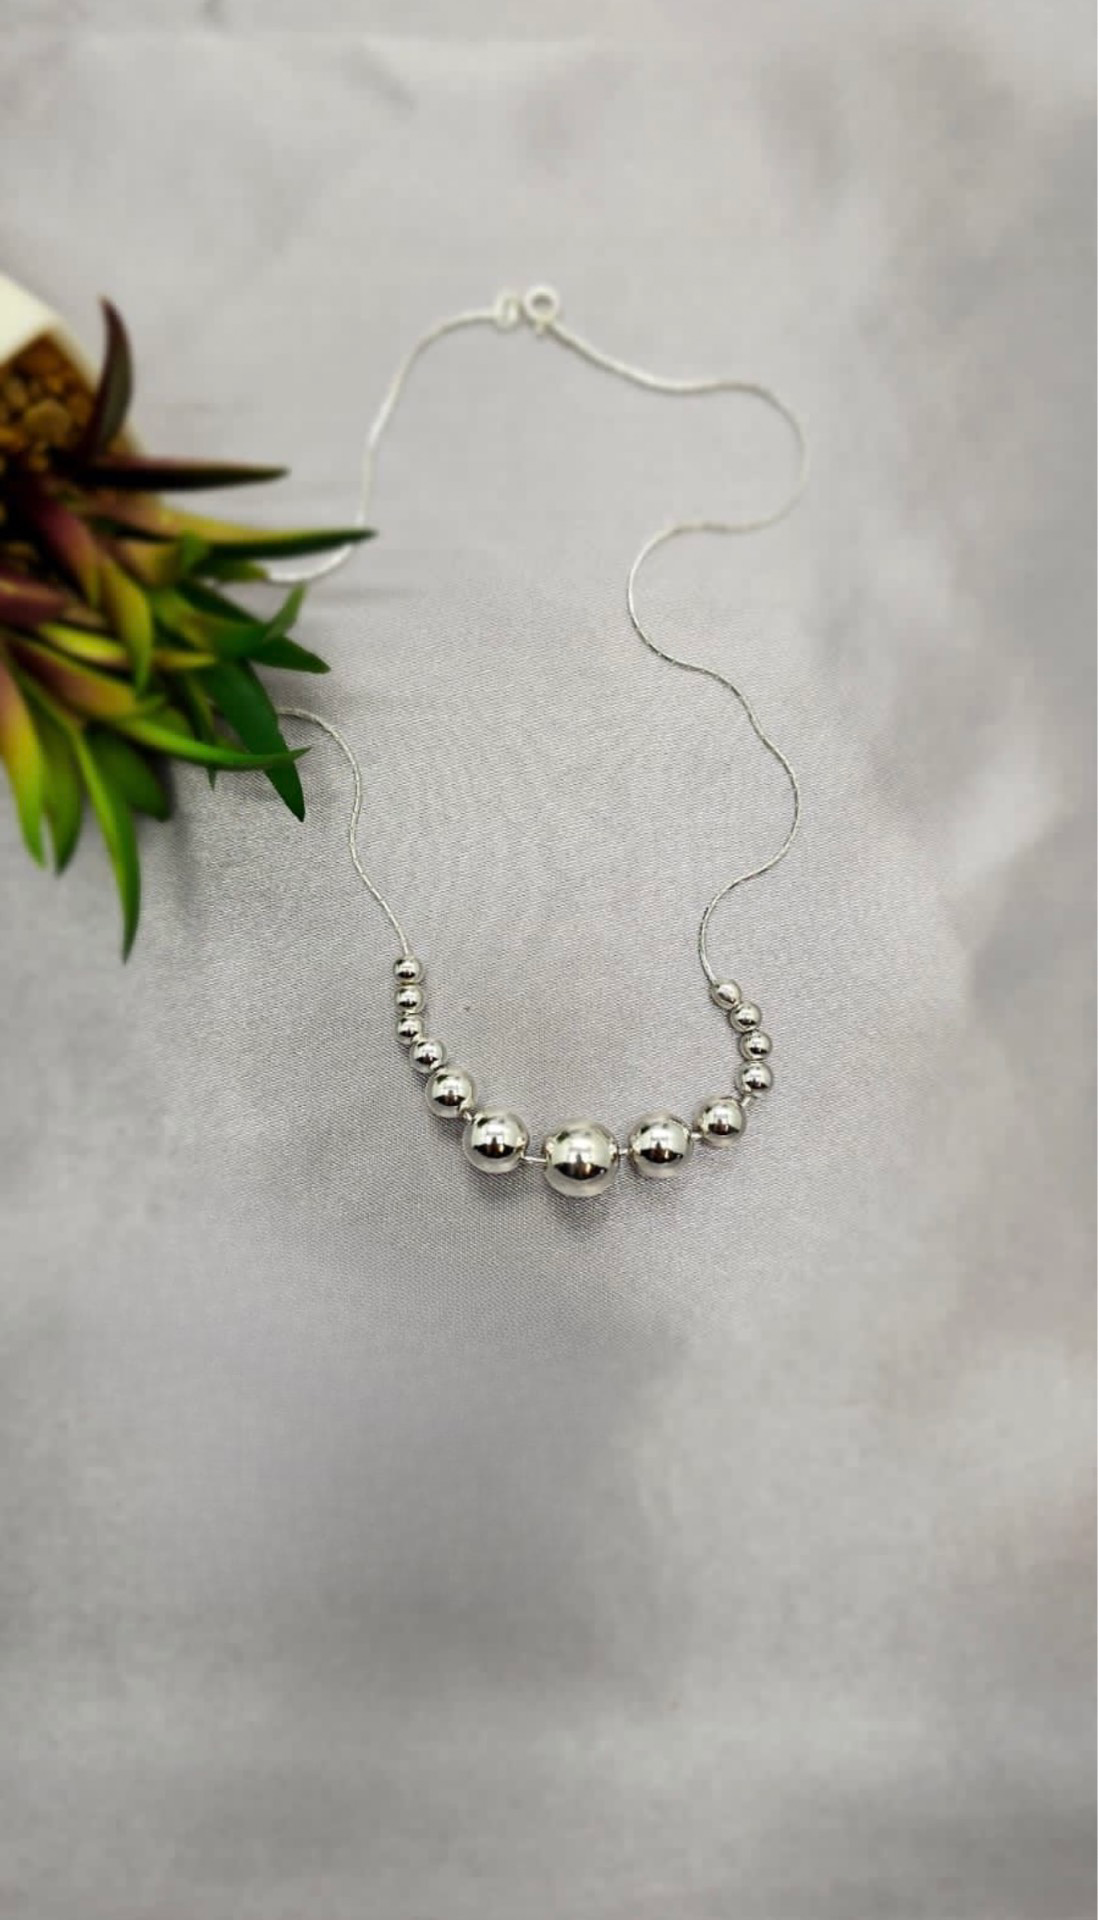 Necklace with 13 silver balls